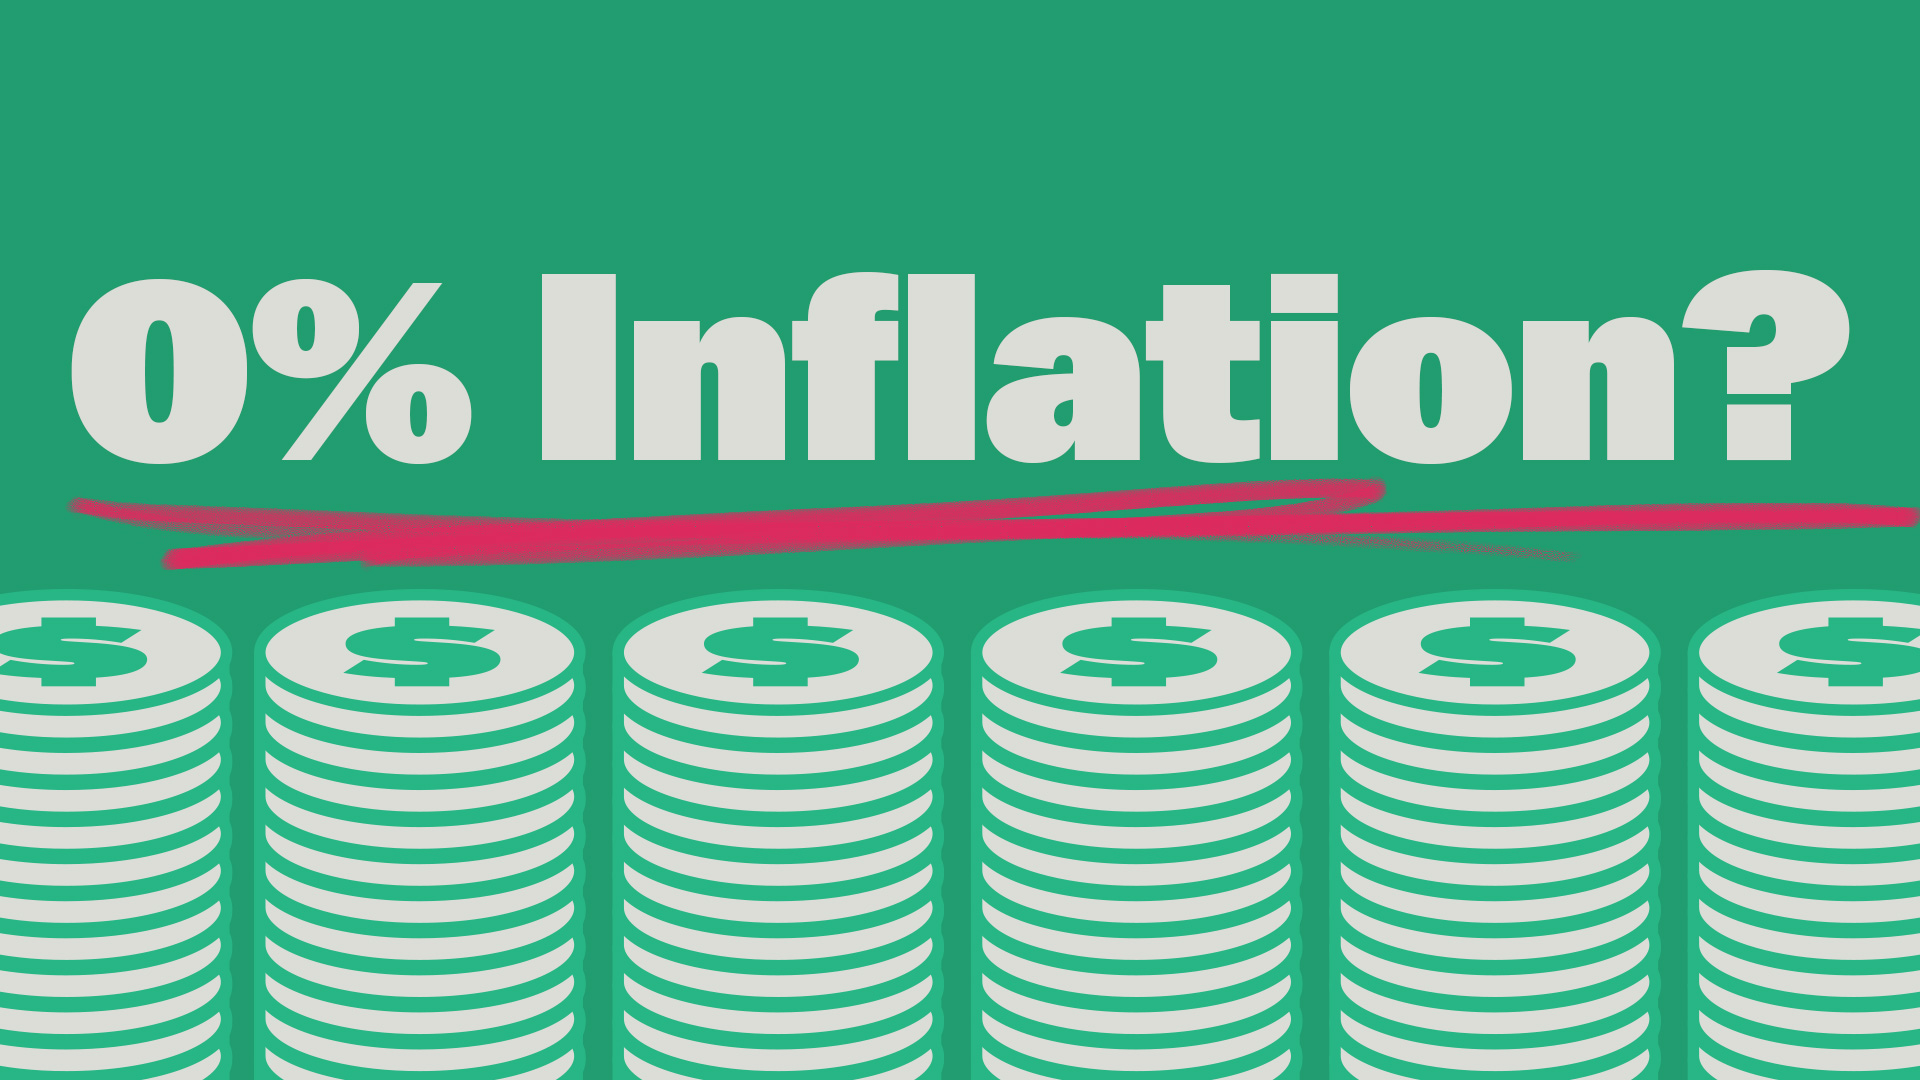 A graphic with a green background, stacks of coins in front, and above them the words “0% inflation” with a red line.